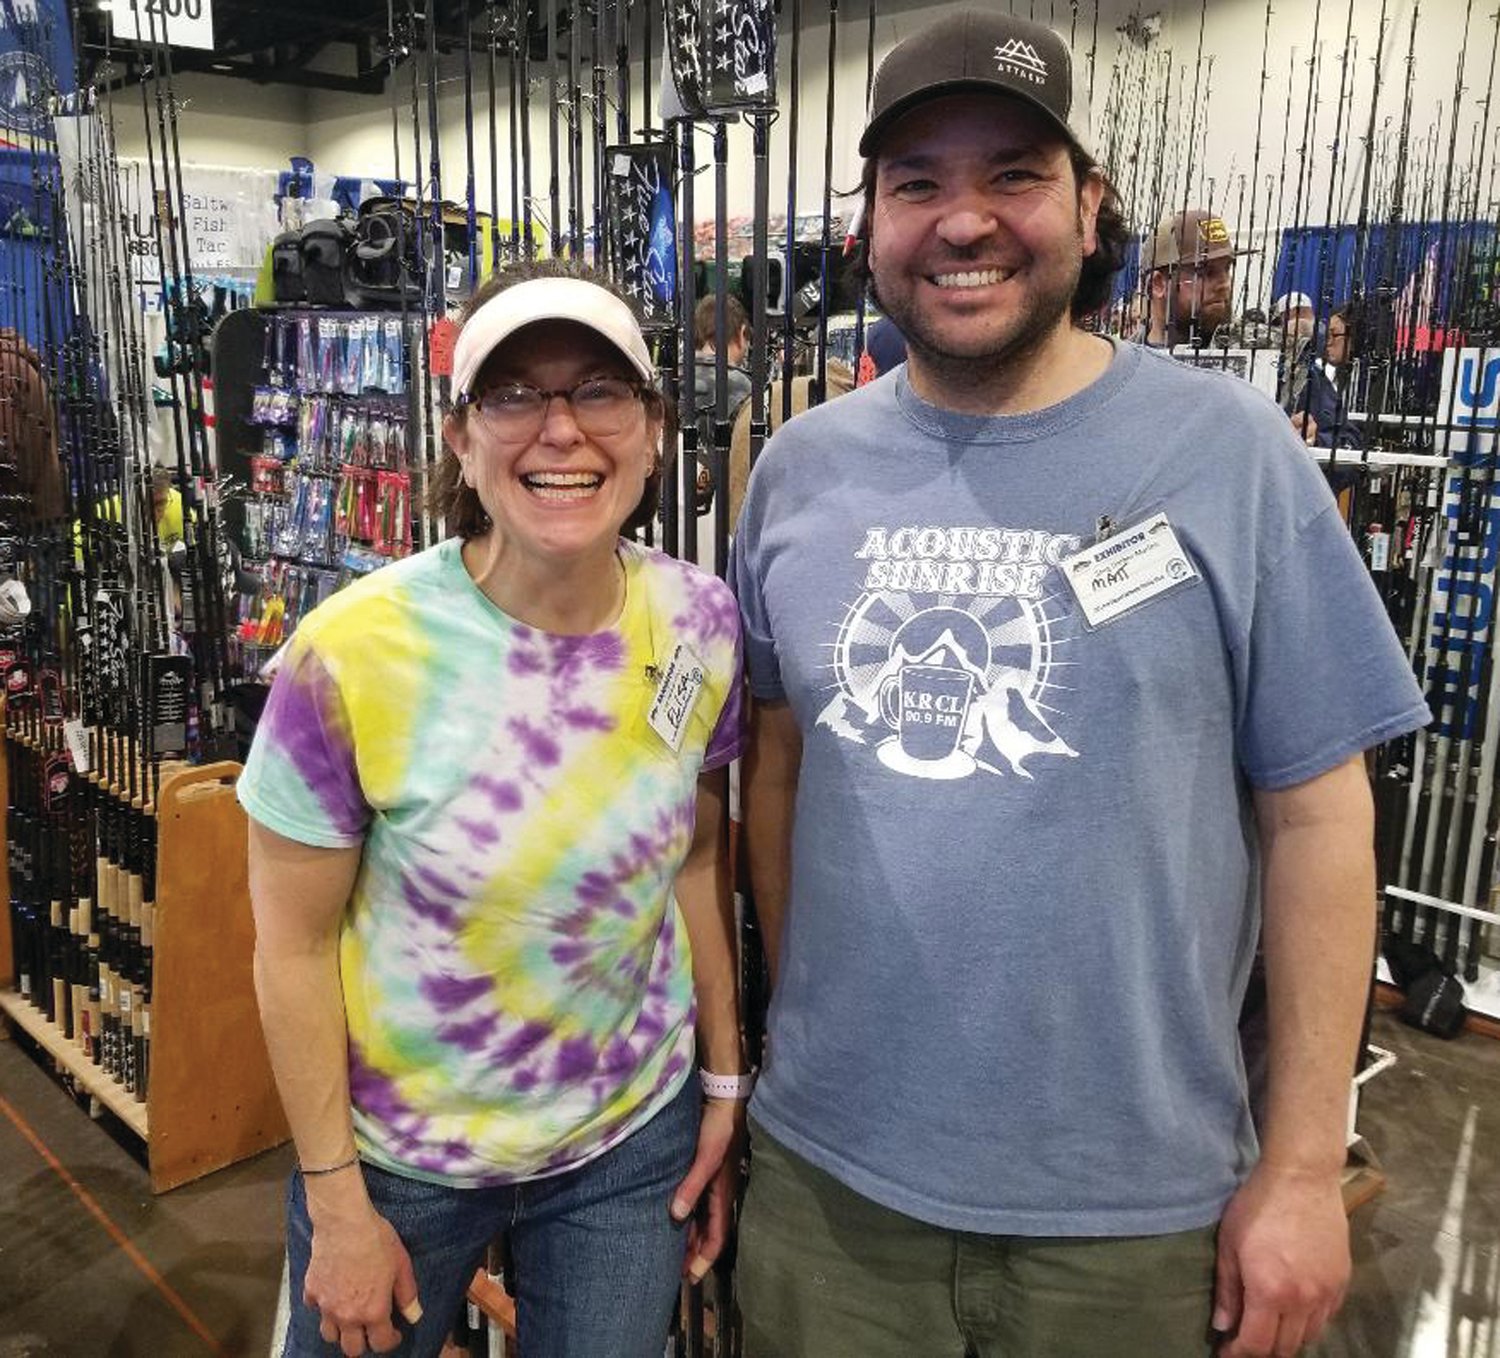 BEST DAY EVER: Elisa Cahill and her brother Matt Conti said they had one of their best days ever. Their booth was buzzing with customers all day Saturday at the Fishing Show. (Submitted photos)